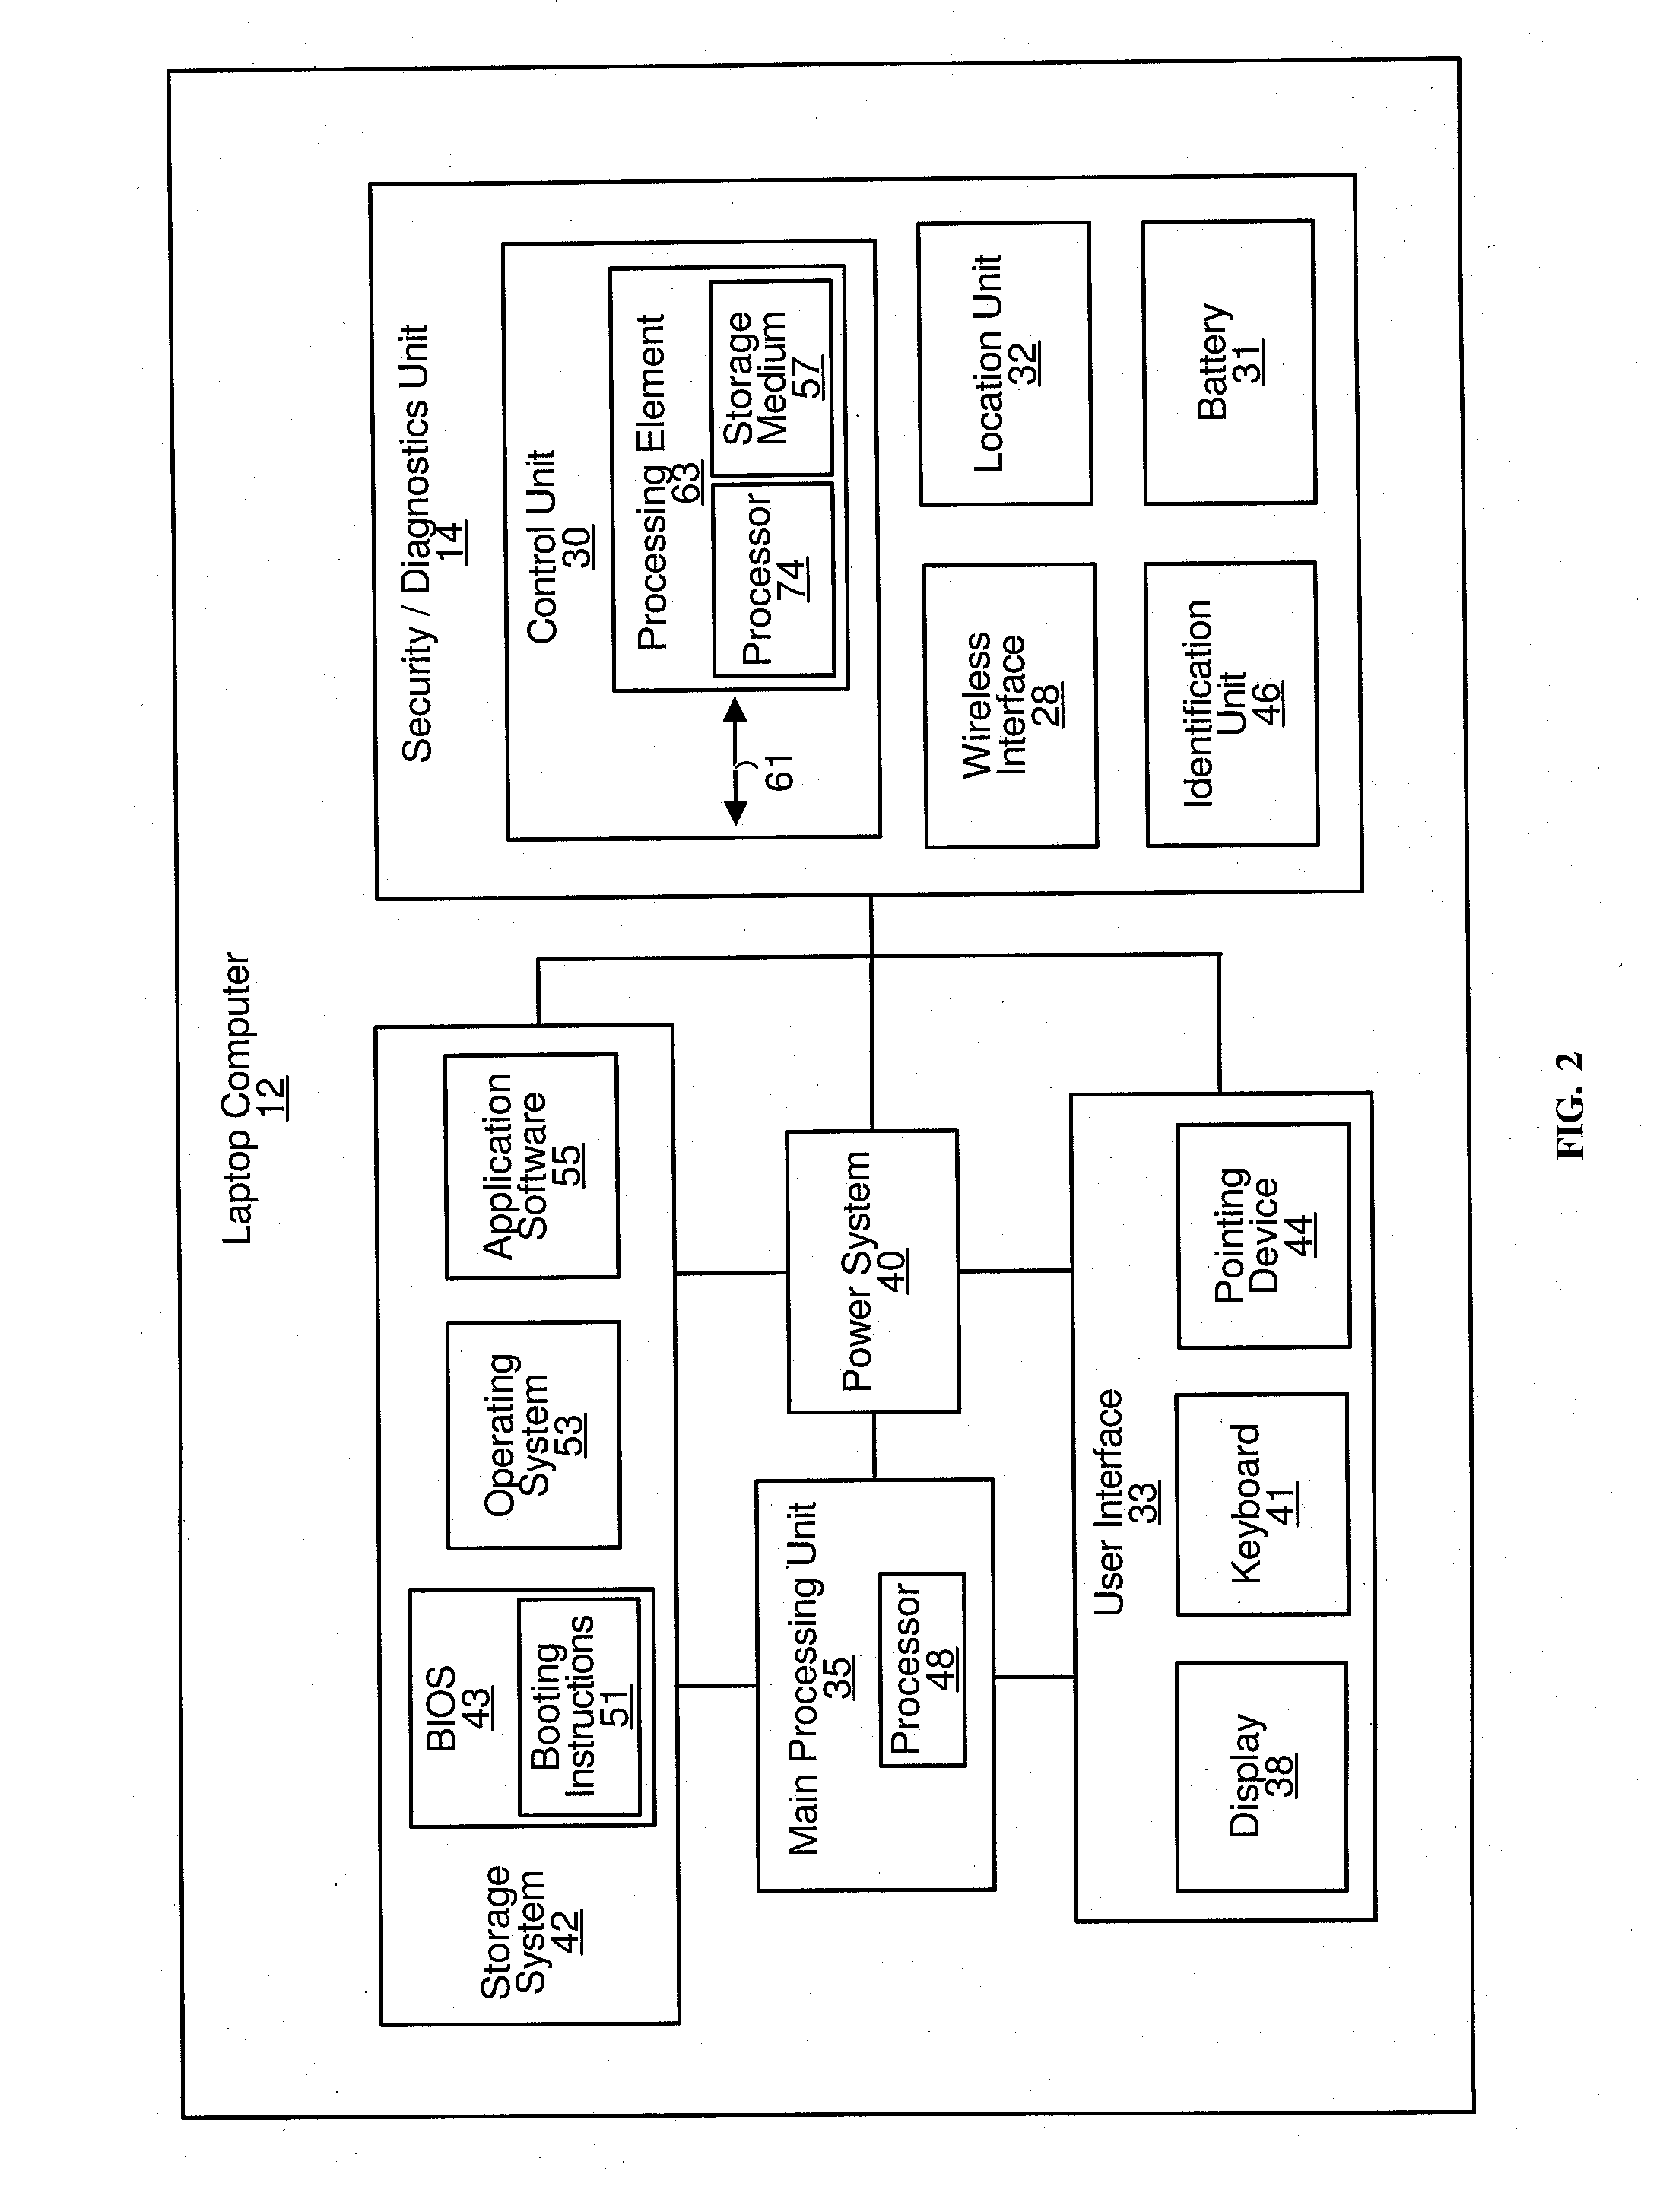 Methods and systems for providing a wireless security service and/or a wireless technical support service for personal computers